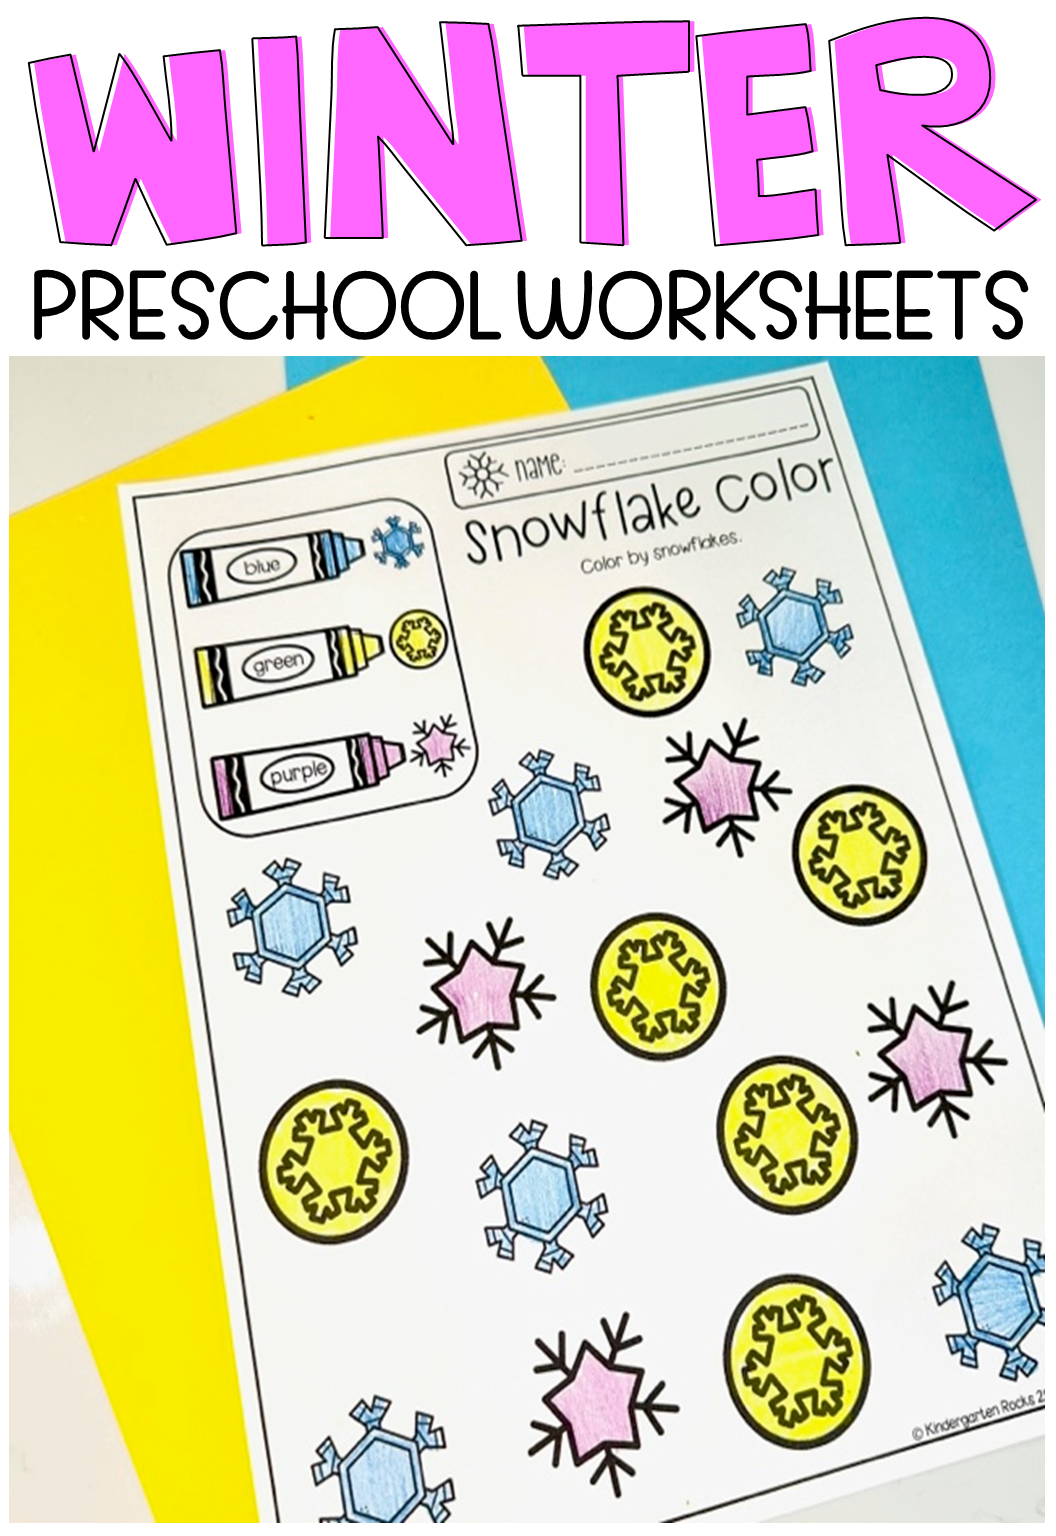 Are you looking for no-prep winter activities, printables and math and literacy worksheets for your preschool or kindergarten classroom? Then you will love our Winter Math and Literacy Worksheets for Preschool.